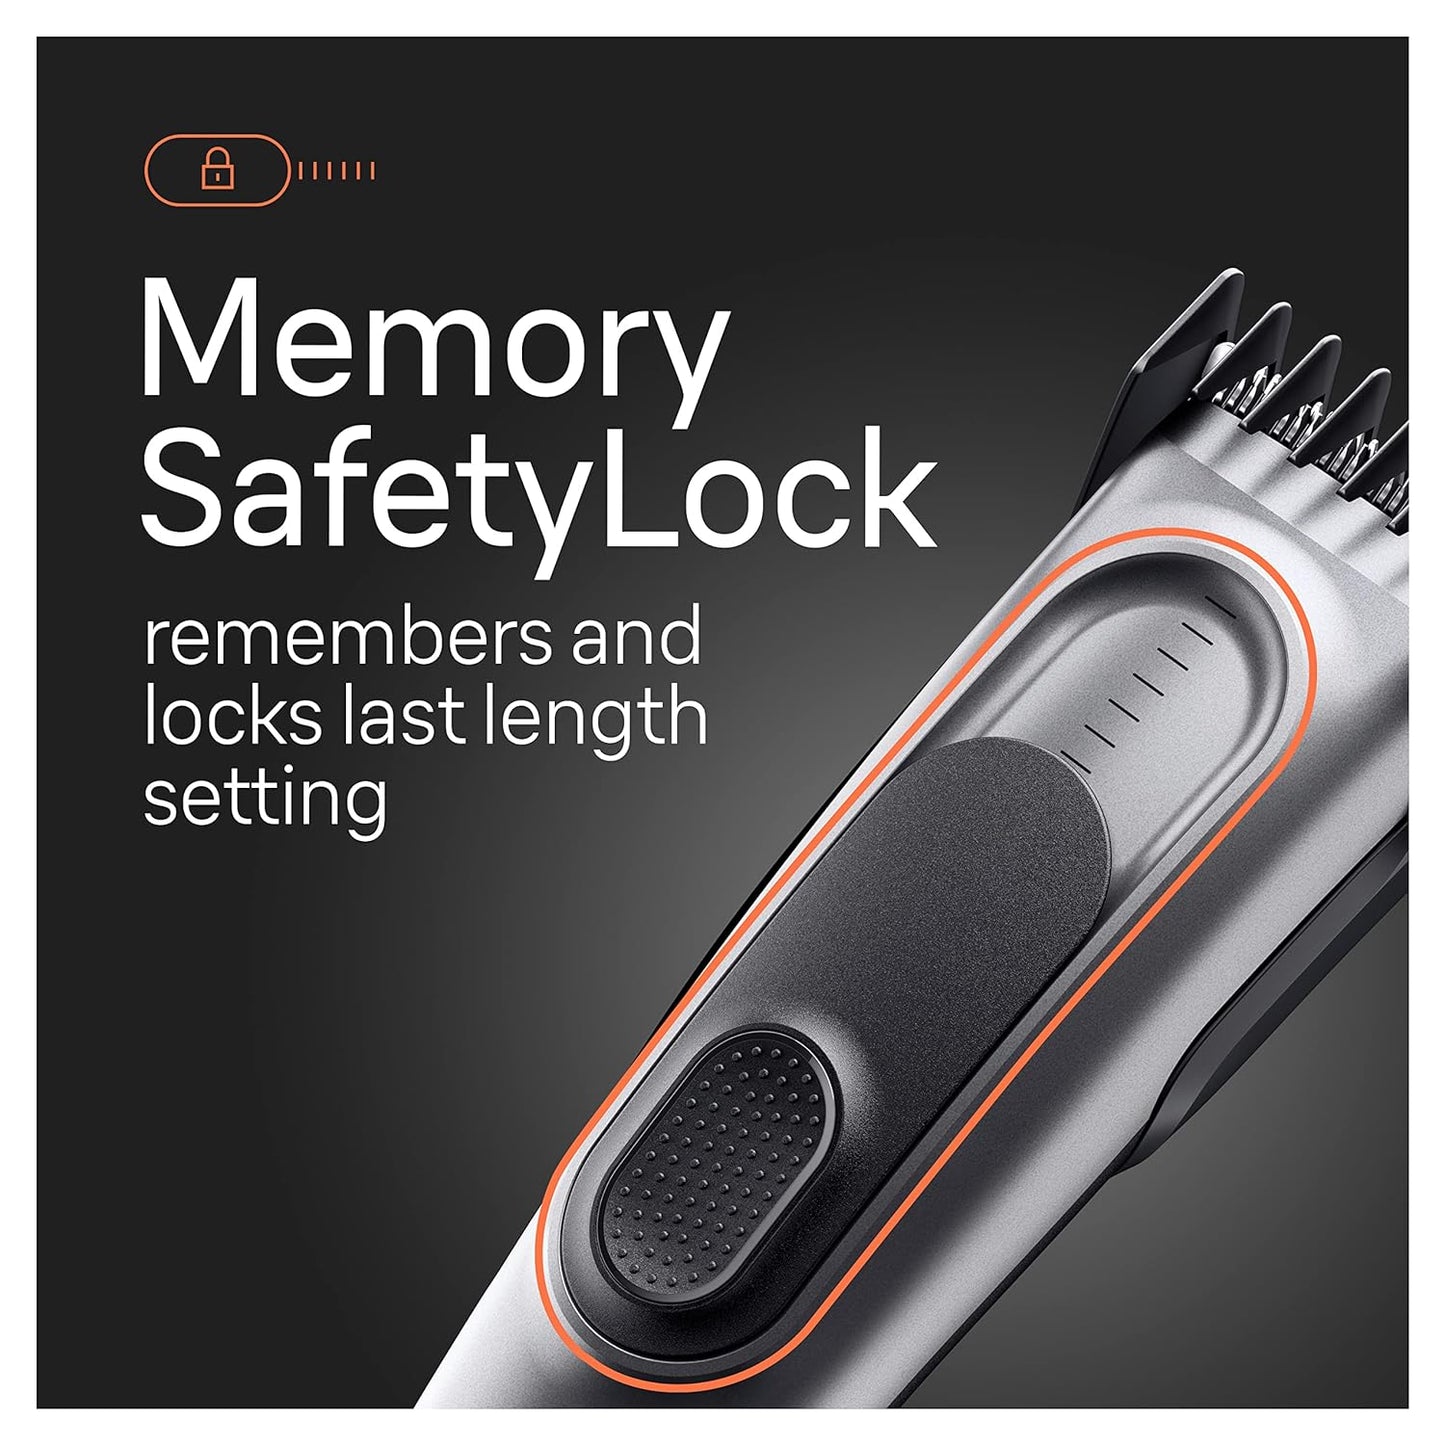 Braun Hair Clippers for Men, Series 7 7390, Hair Clip from Home with 17 Length / Recall Setting, Incl. Memory SafetyLock, Ultra-Sharp Blades, 2 Combs, Stand, Pouch, Washable